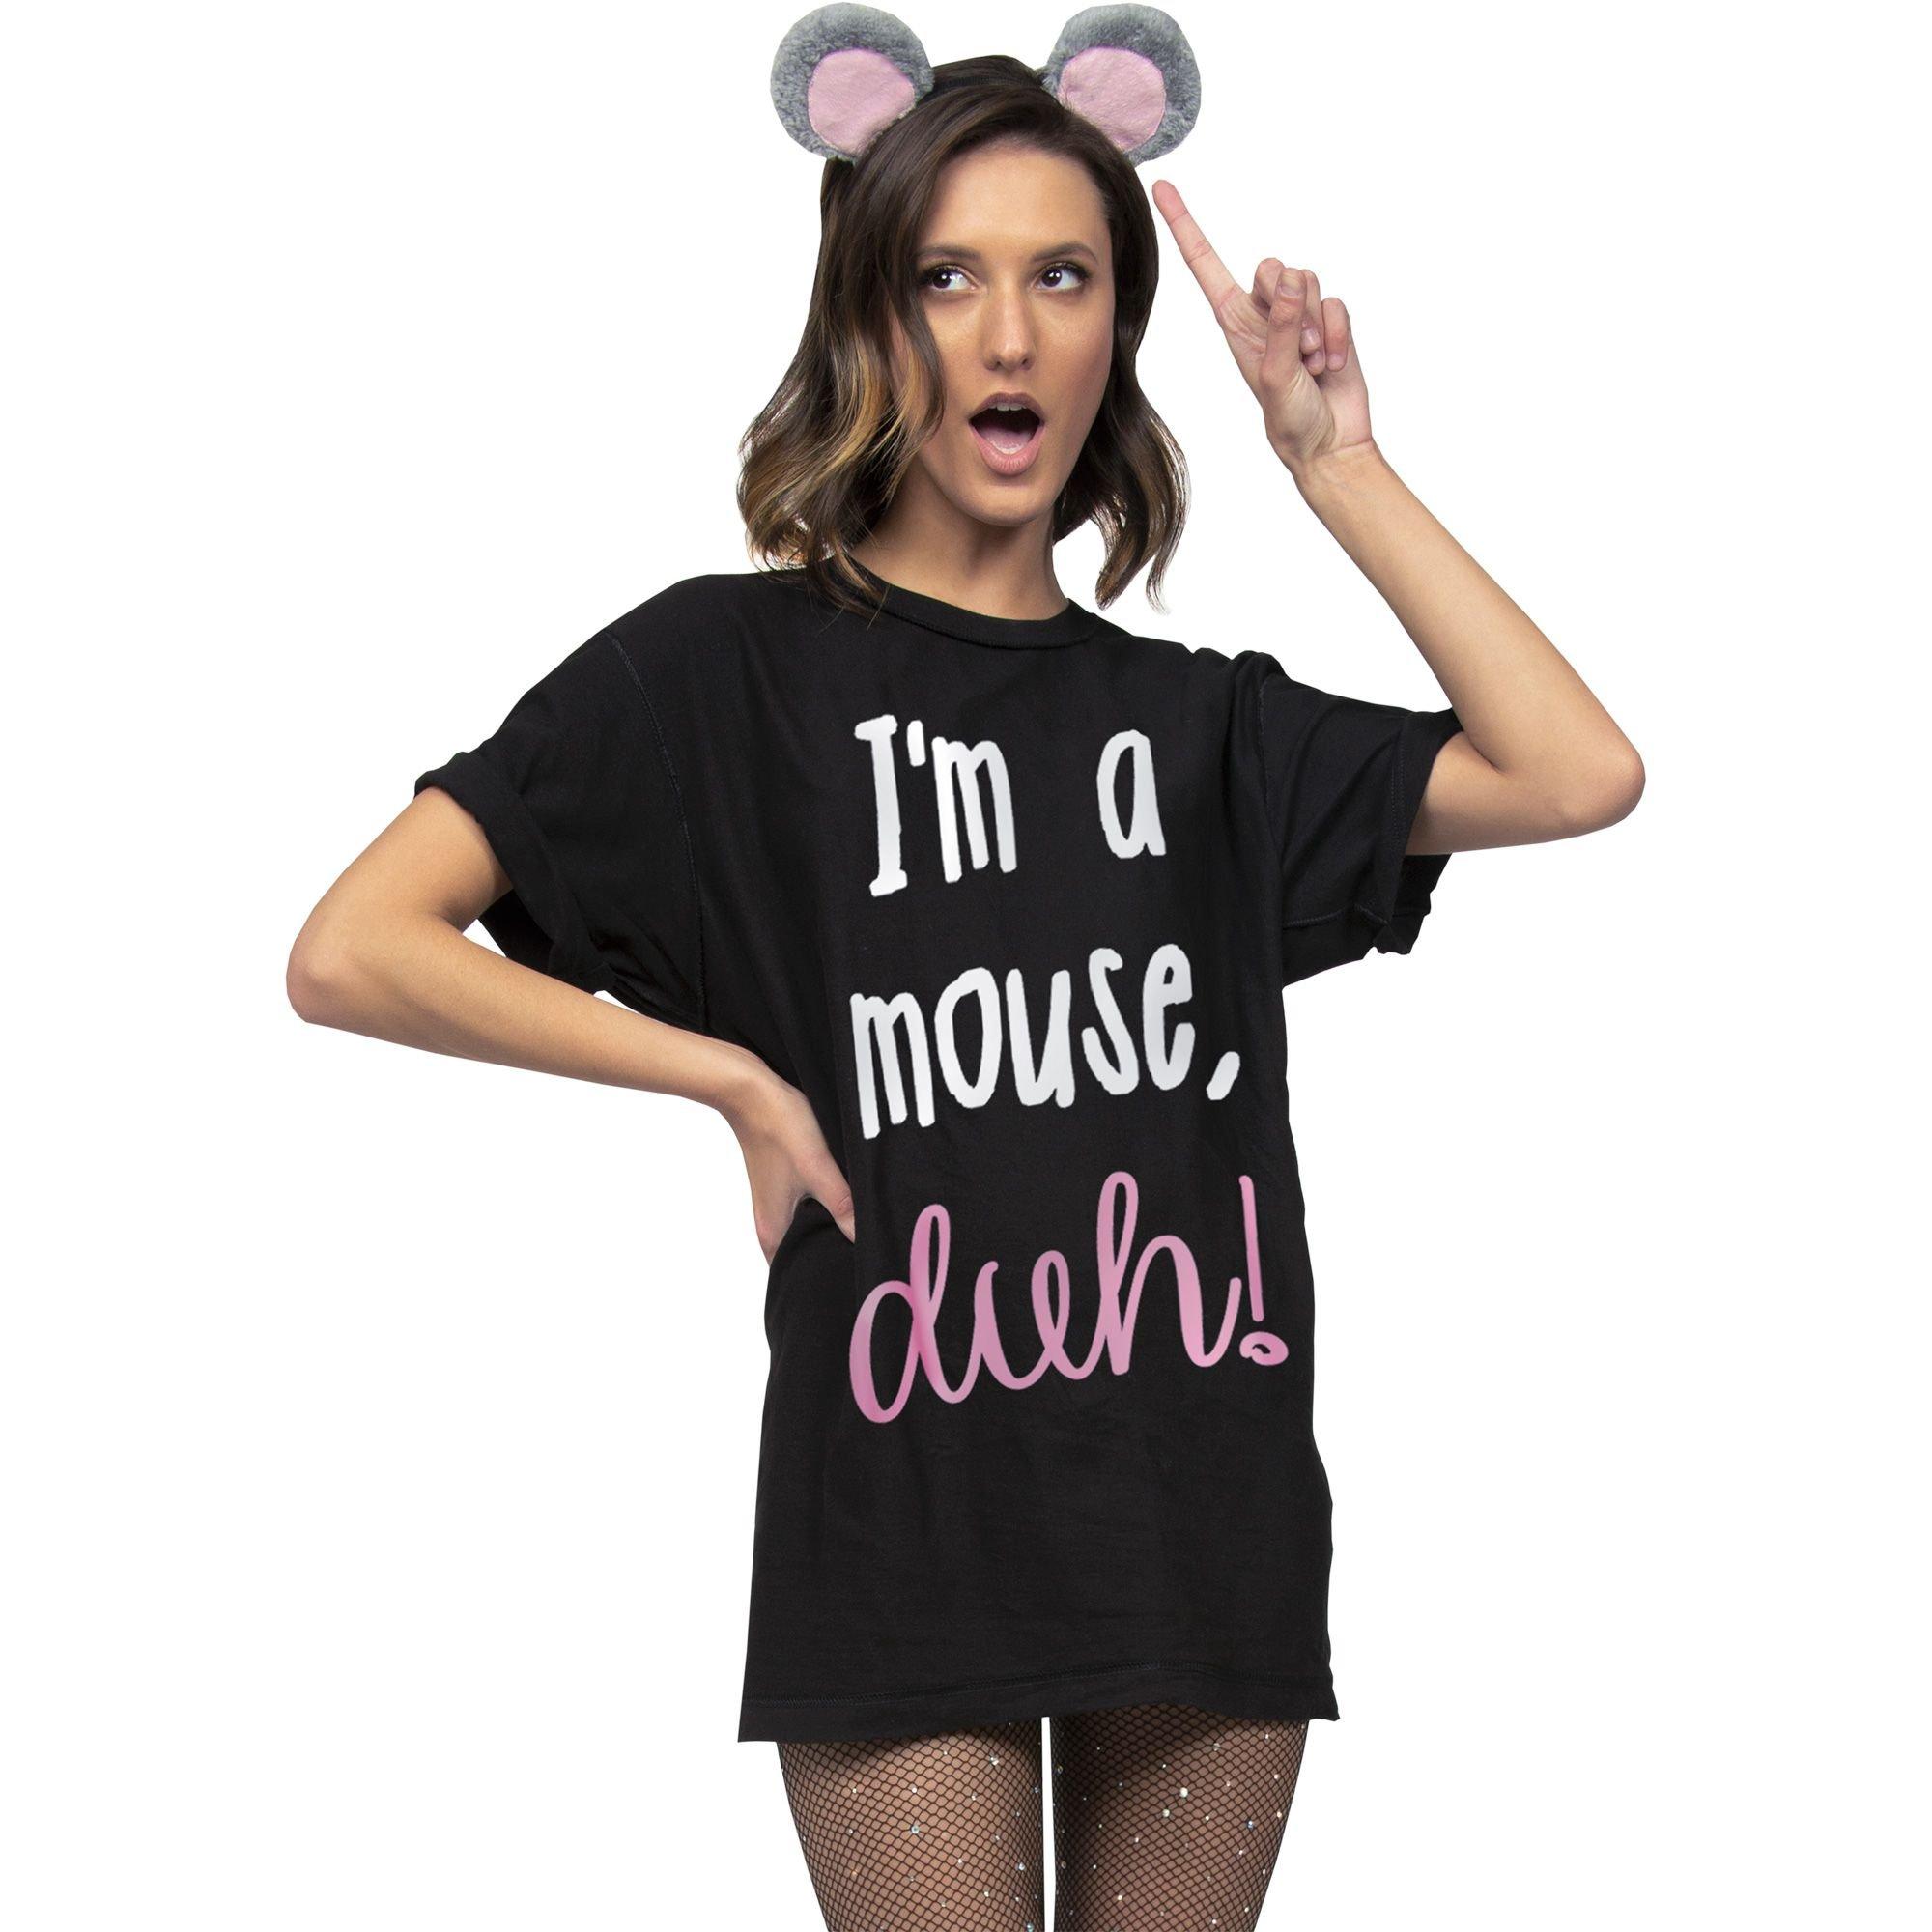 mouse costume